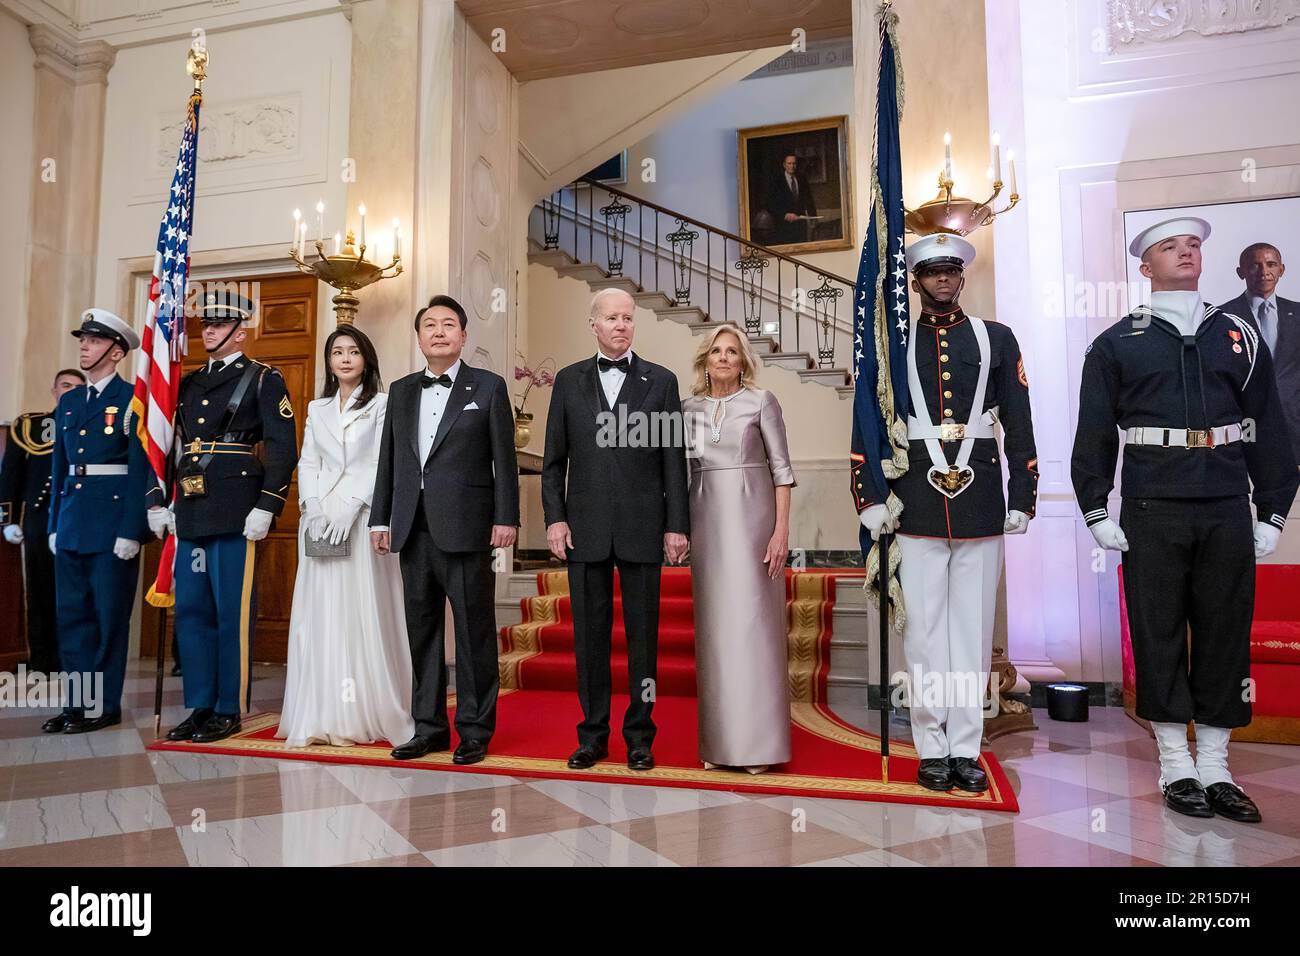 President Joe Biden and First Lady Jill Biden pose for a photo with President Yoon Suk Yeol of the Republic of Korea and Mrs. Kim Keon Hee by the Grand Staircase prior to a State Dinner, Wednesday, April 26, 2023, at the White House. (Official White House Photo by Cameron Smith) Stock Photo